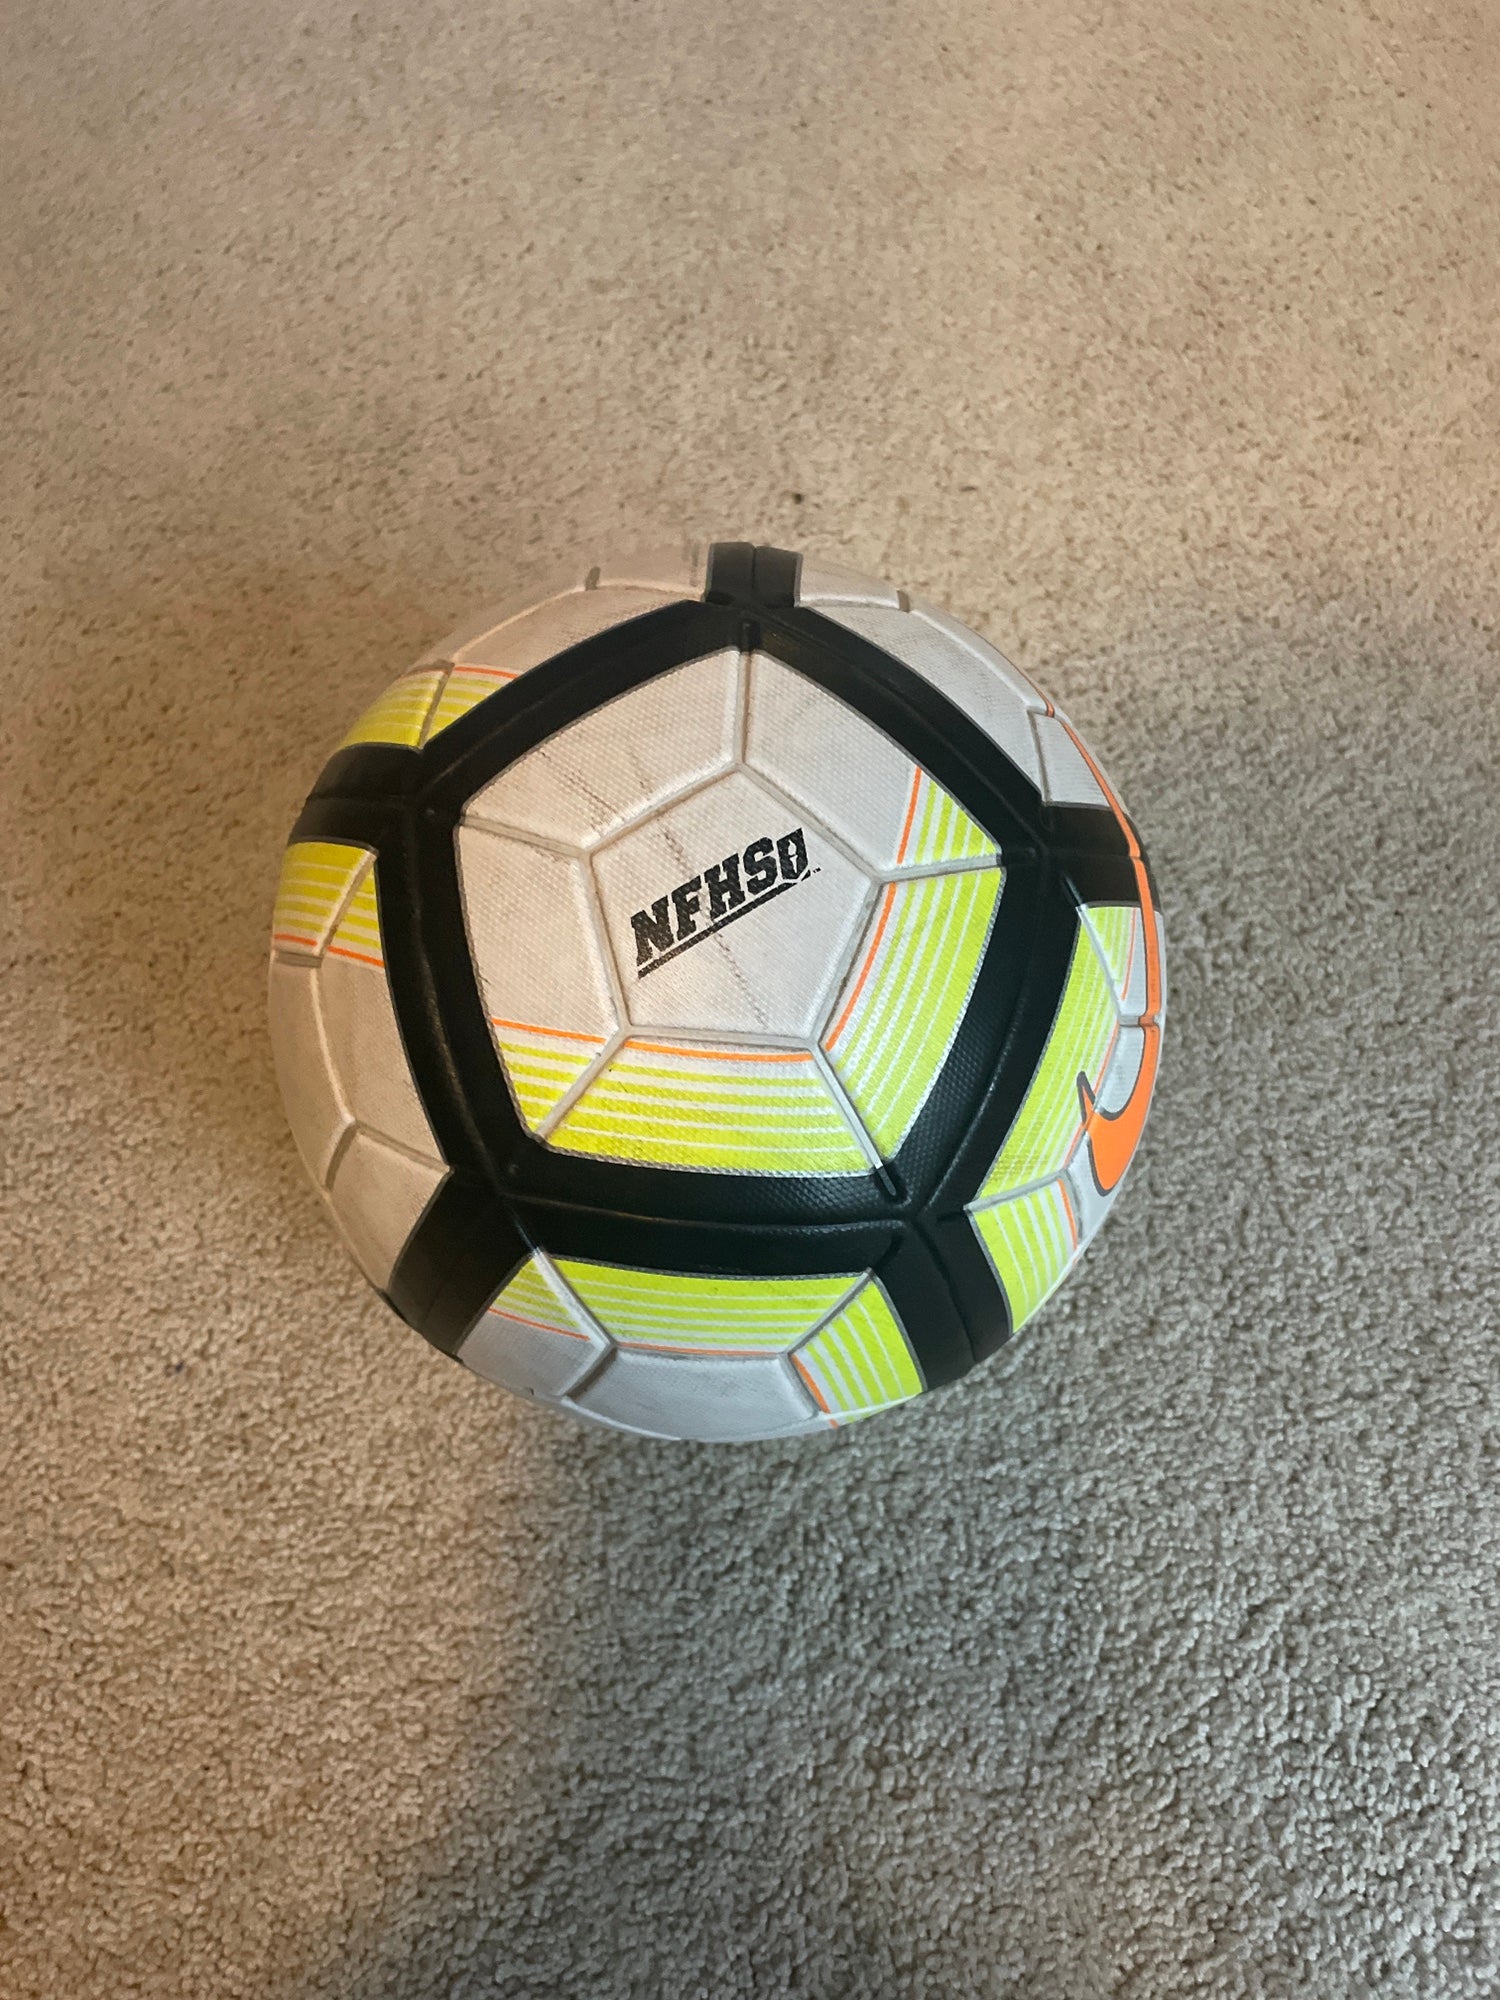 Assimilation Formation volatility Nike Magia Soccer Ball | SidelineSwap